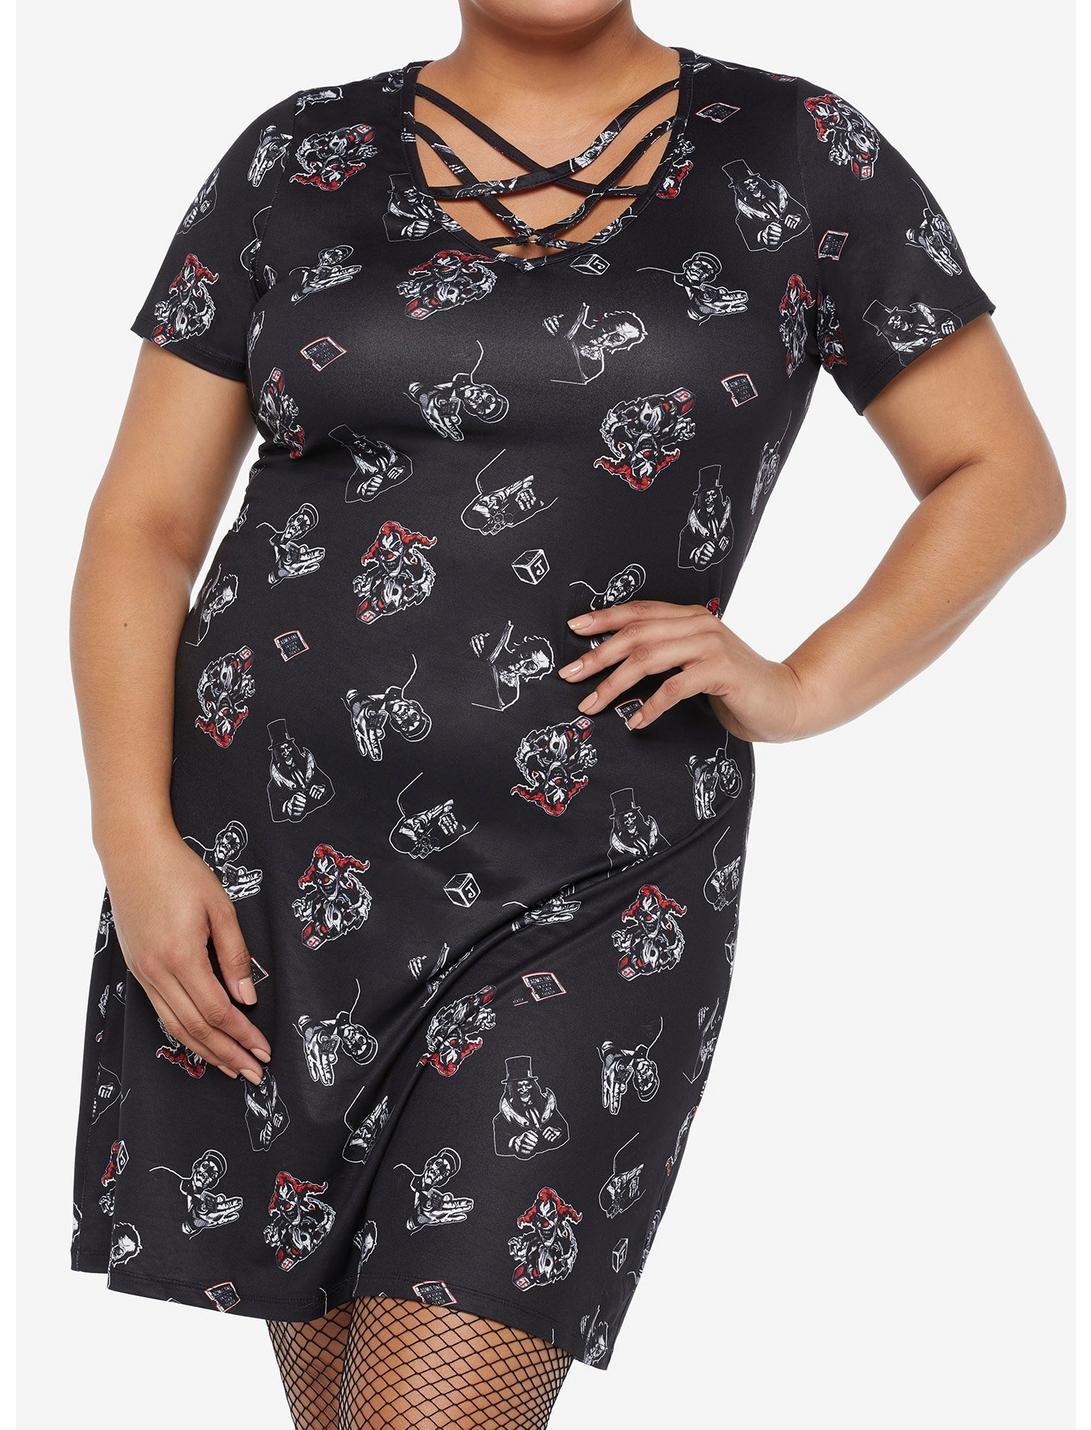 Universal Studios Halloween Horror Nights Characters Lace-Up Bodycon Dress Plus Size, MULTI, hi-res